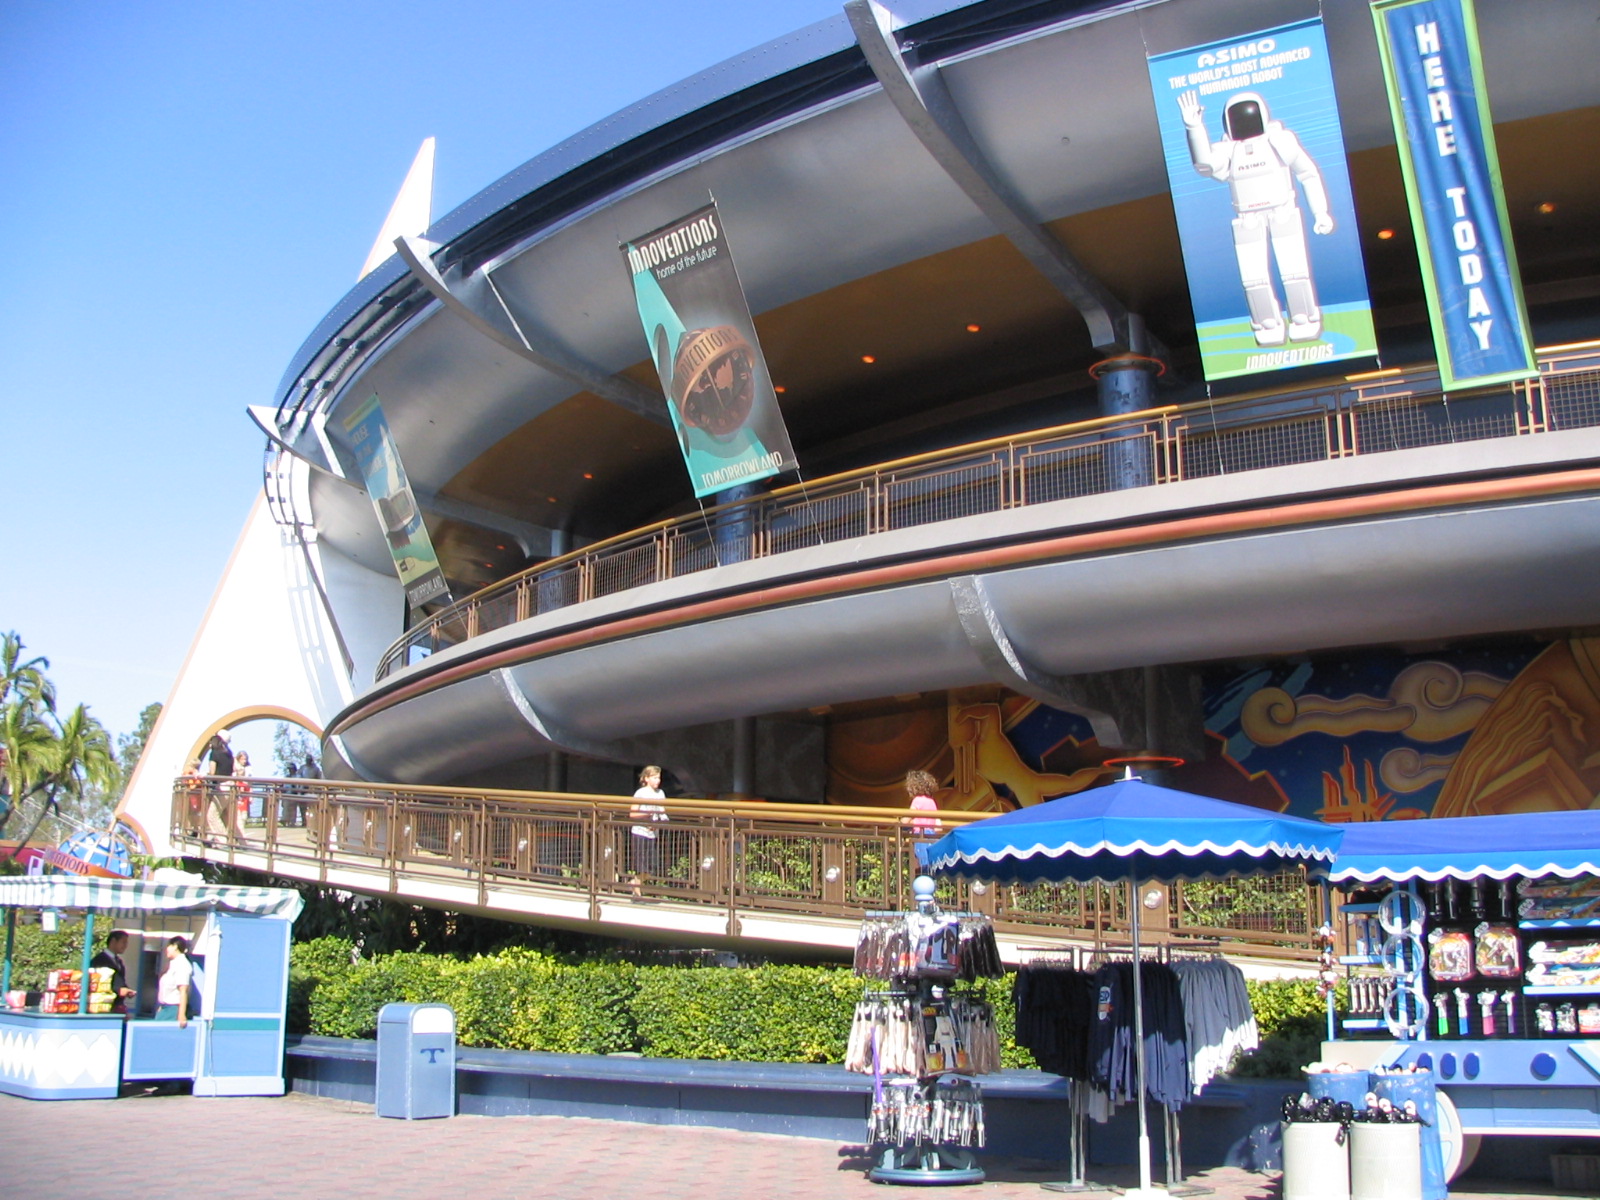 Disneyland's New Innoventions Rumored to Open in November